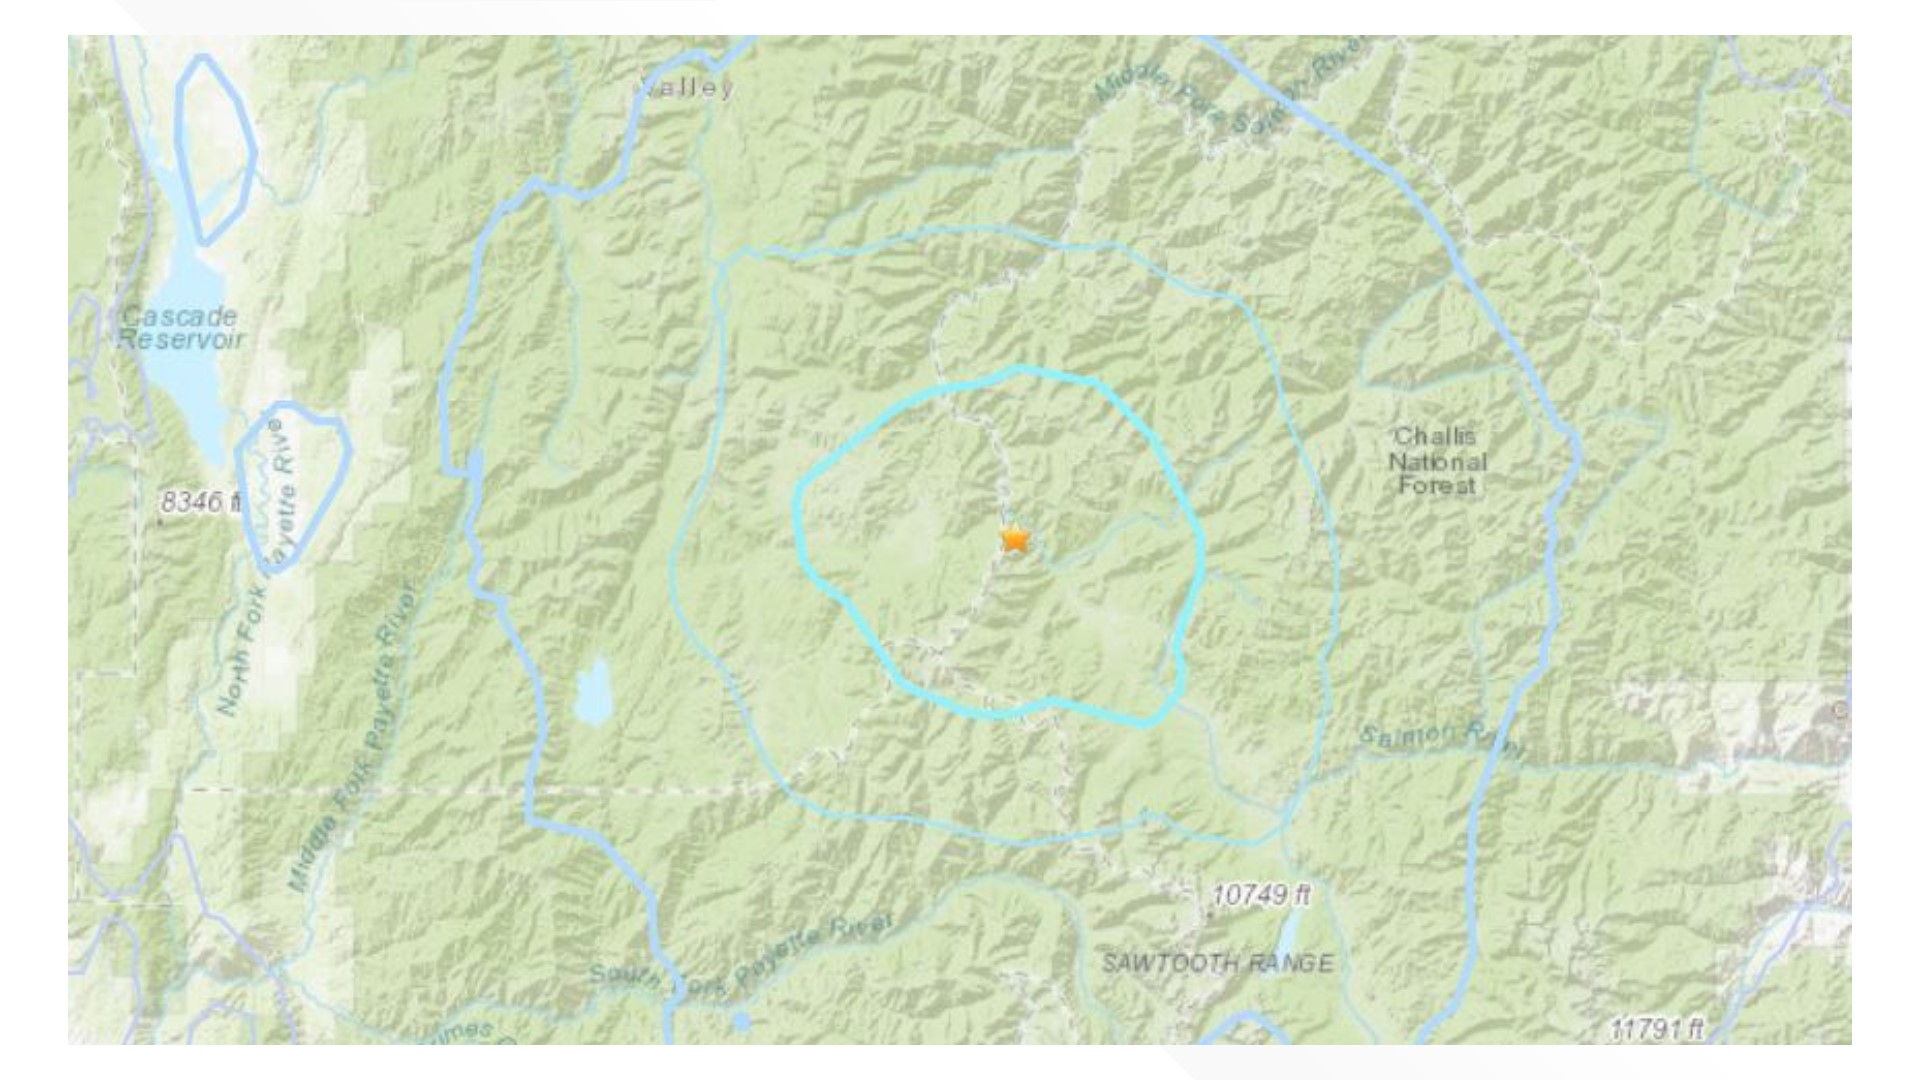 Nearly two months after a magnitude 6.5 earthquake shook Idaho and surrounding states, a pair of quakes rattled the Cascade area Thursday morning.